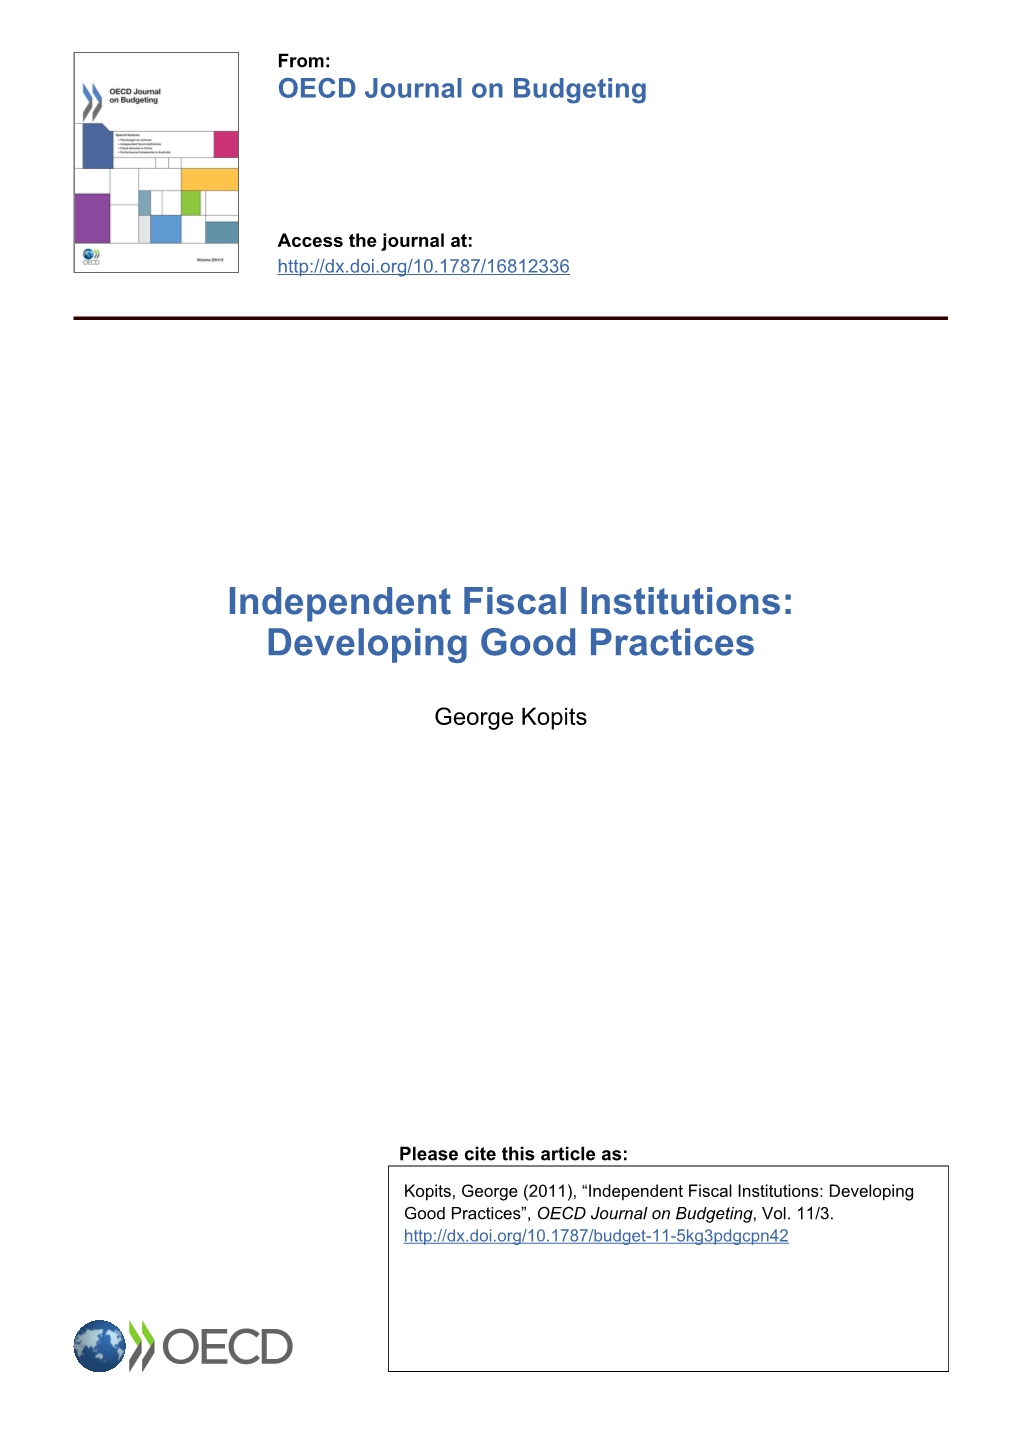 Independent Fiscal Institutions: Developing Good Practices